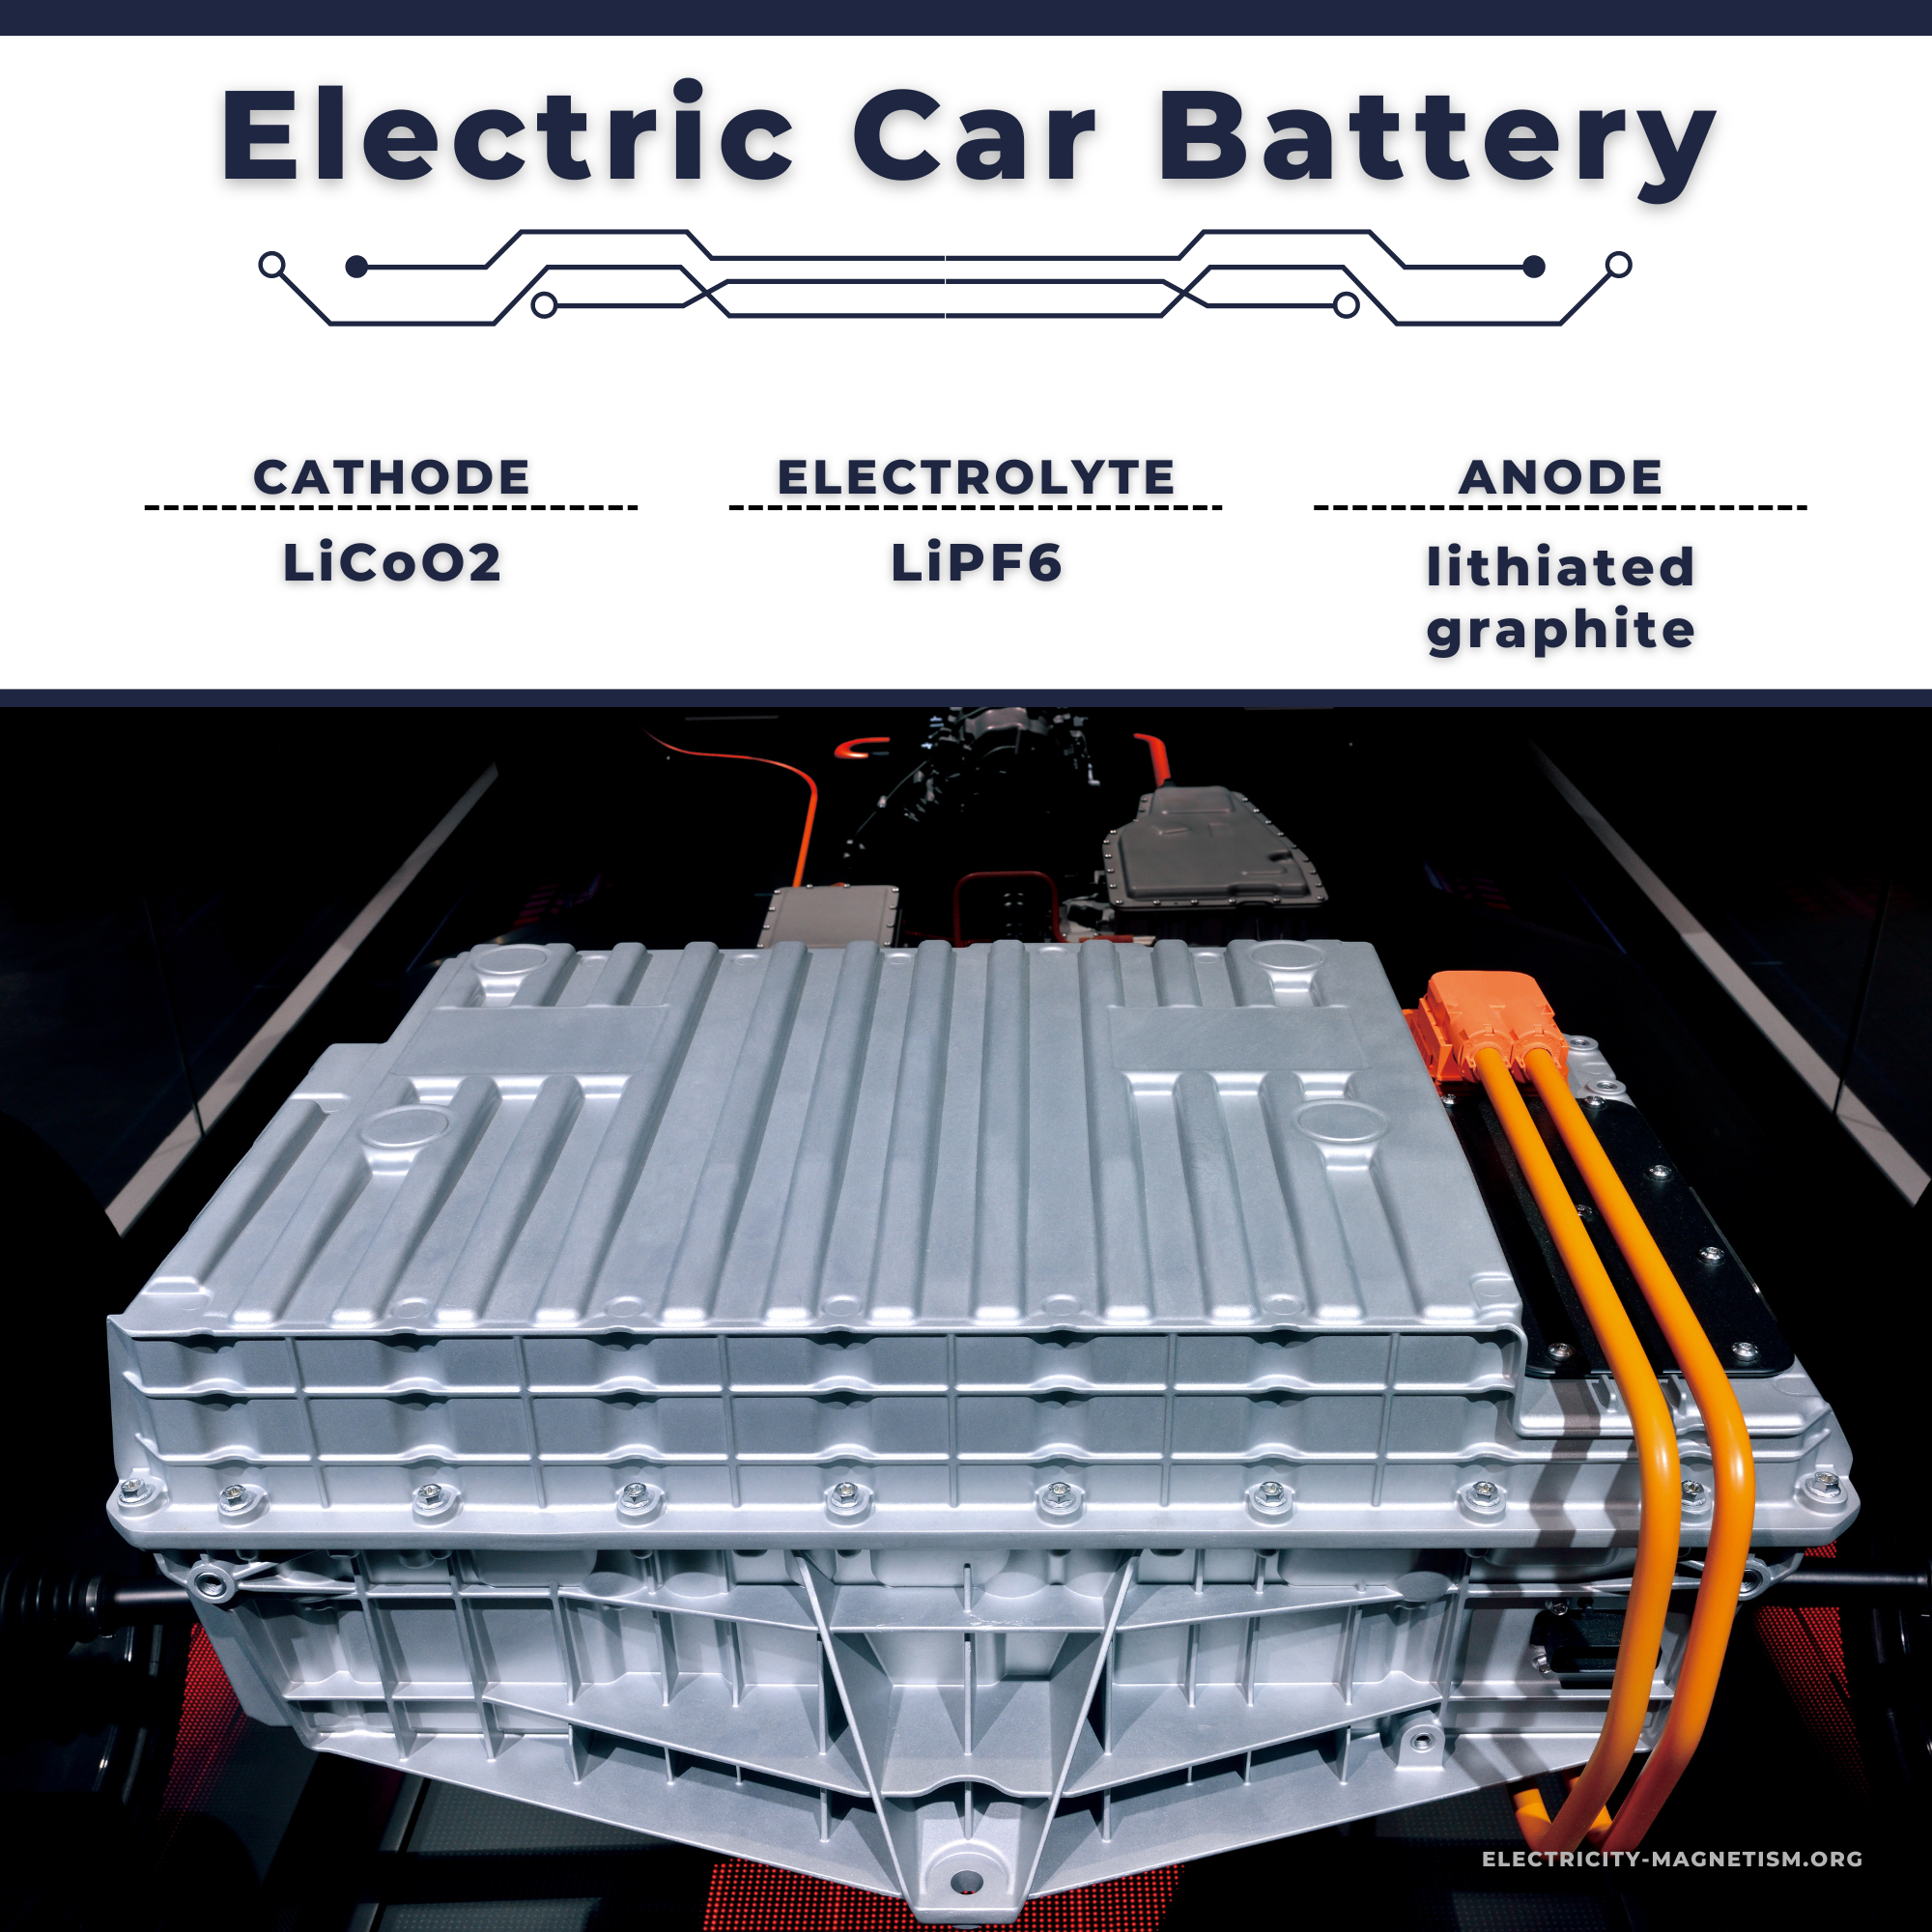 https://www.electricity-magnetism.org/wp-content/uploads/2022/10/Electric-car-battery-composition.png